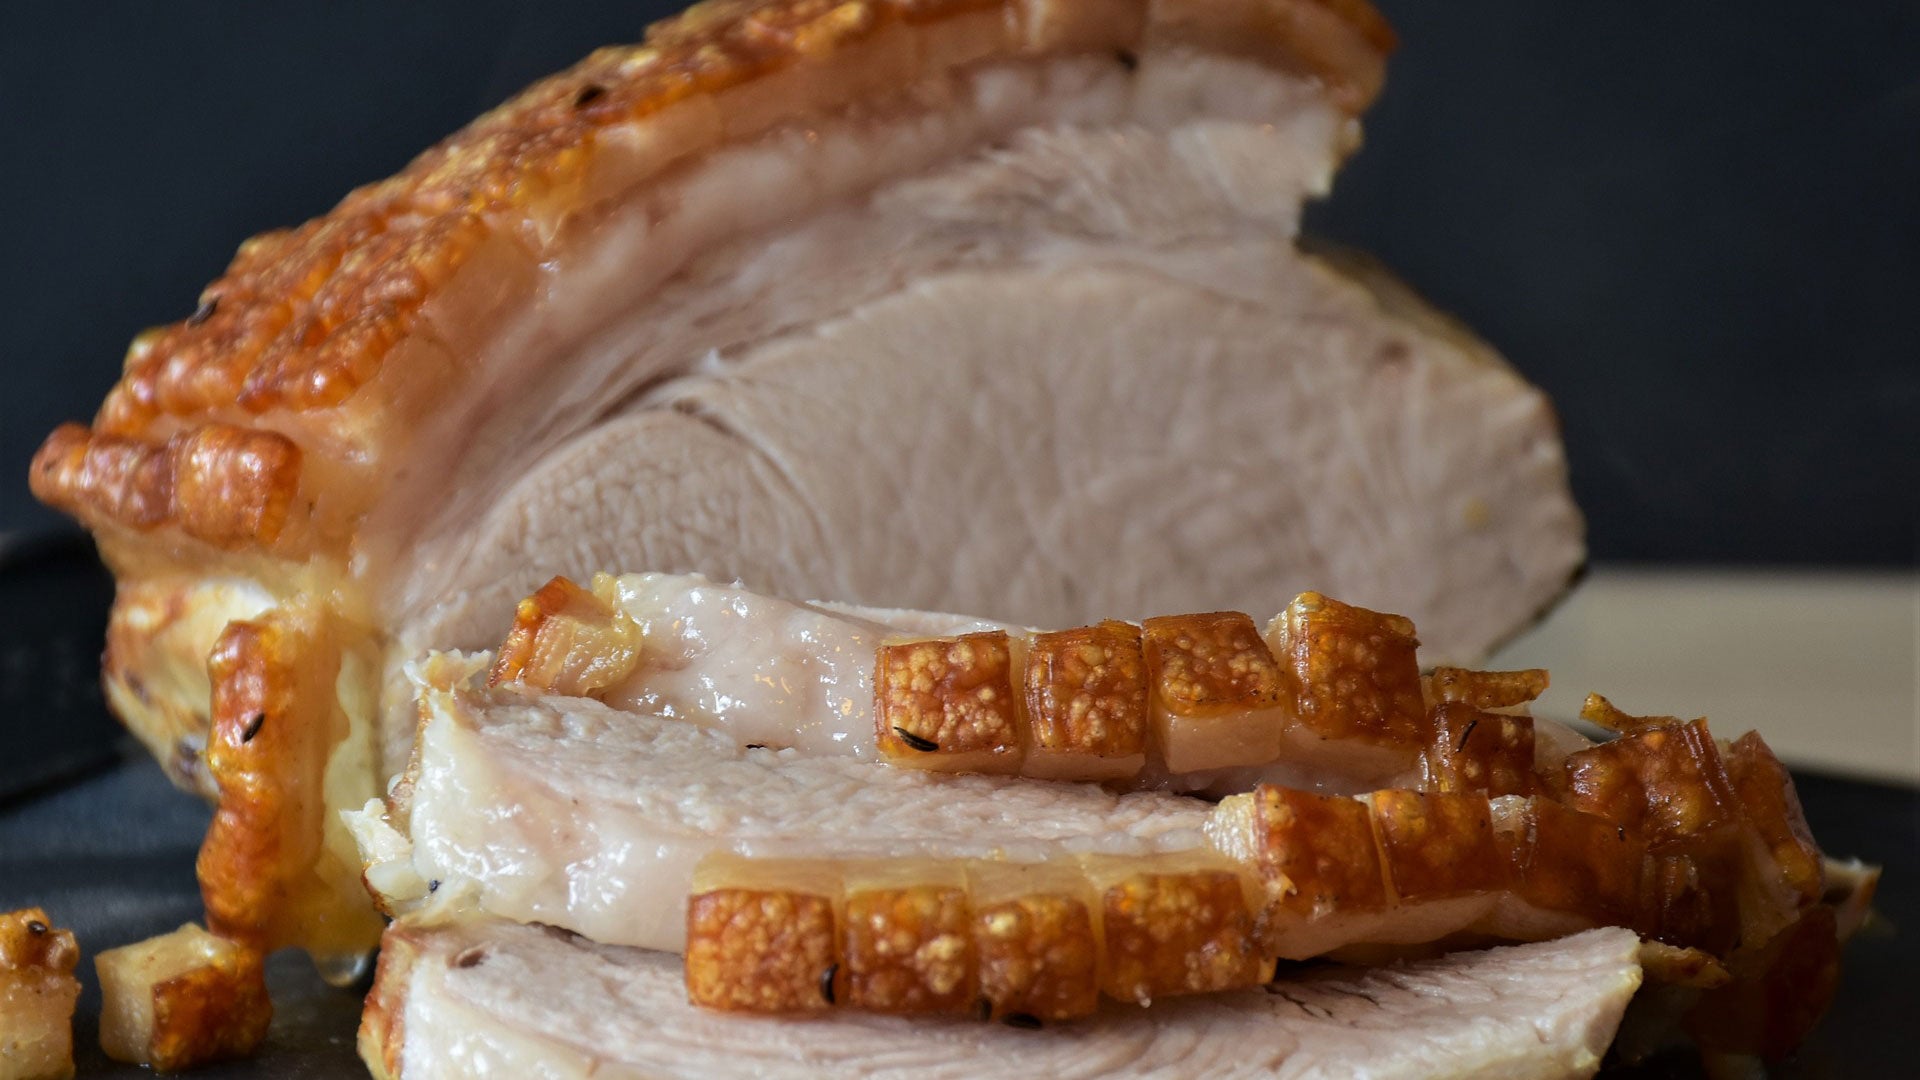 Roast Pork - eat with red or white wine